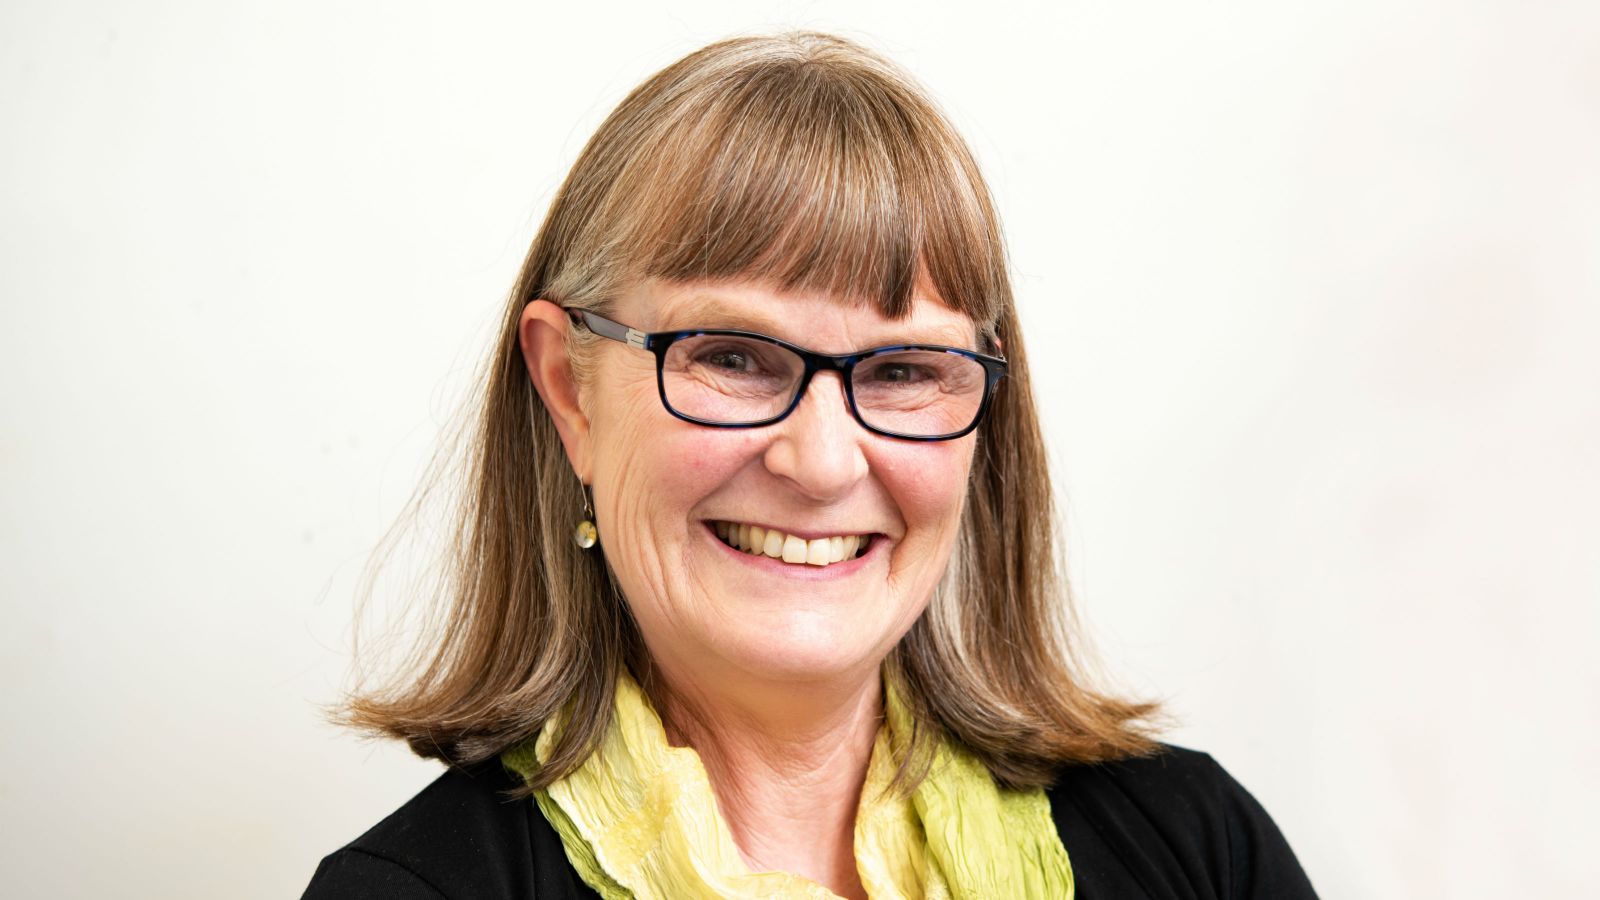 Kay Hancock smiling in a yellow scarf and black rimmed reading glasses. Her hair is blonde, shoulder length, and cut in bangs.